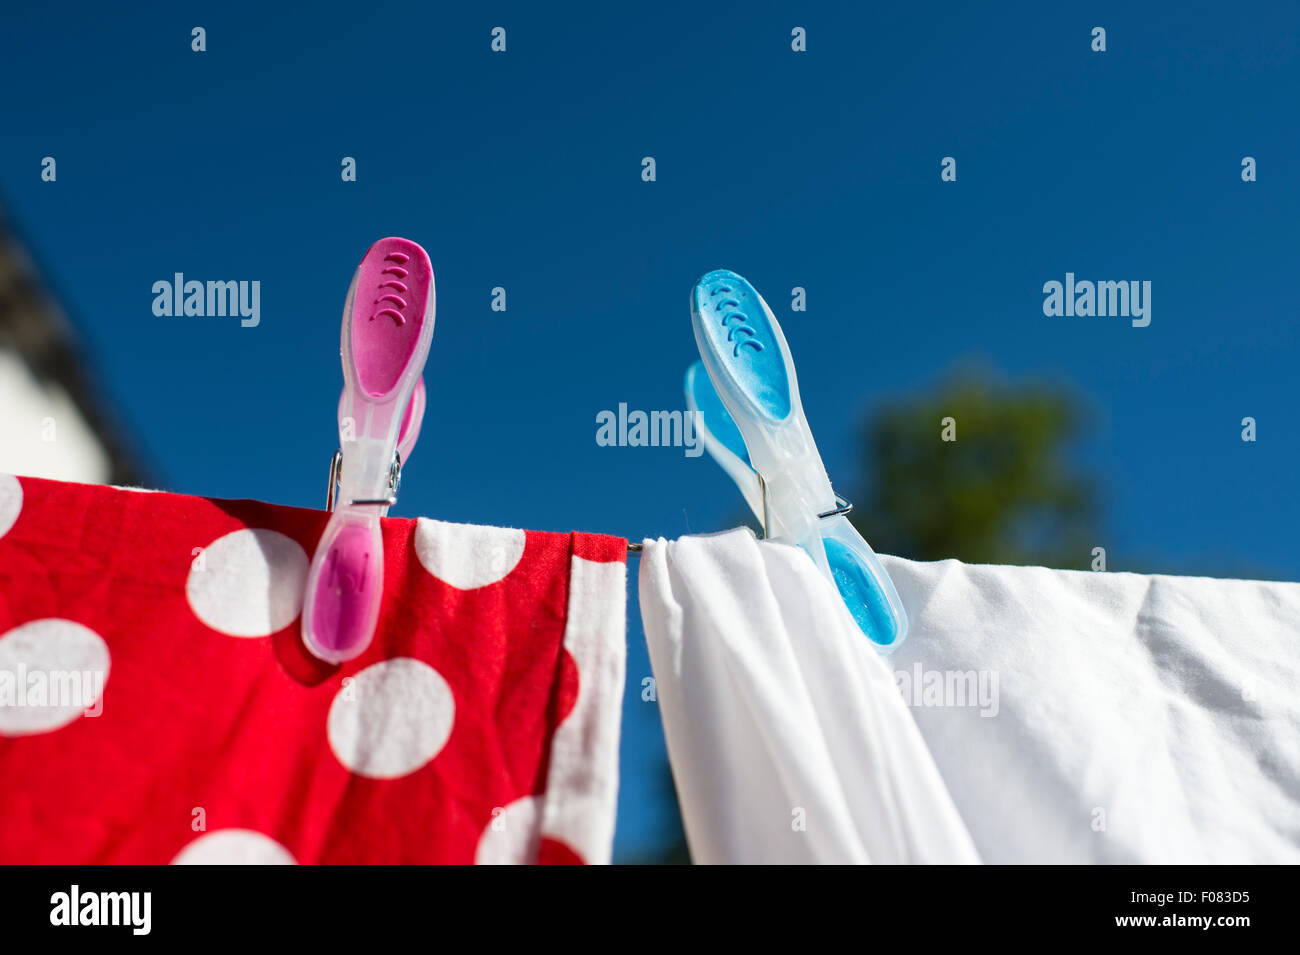 Red and white laundry drying in the sun pegged on washing line with coloured pegs. Stock Photo